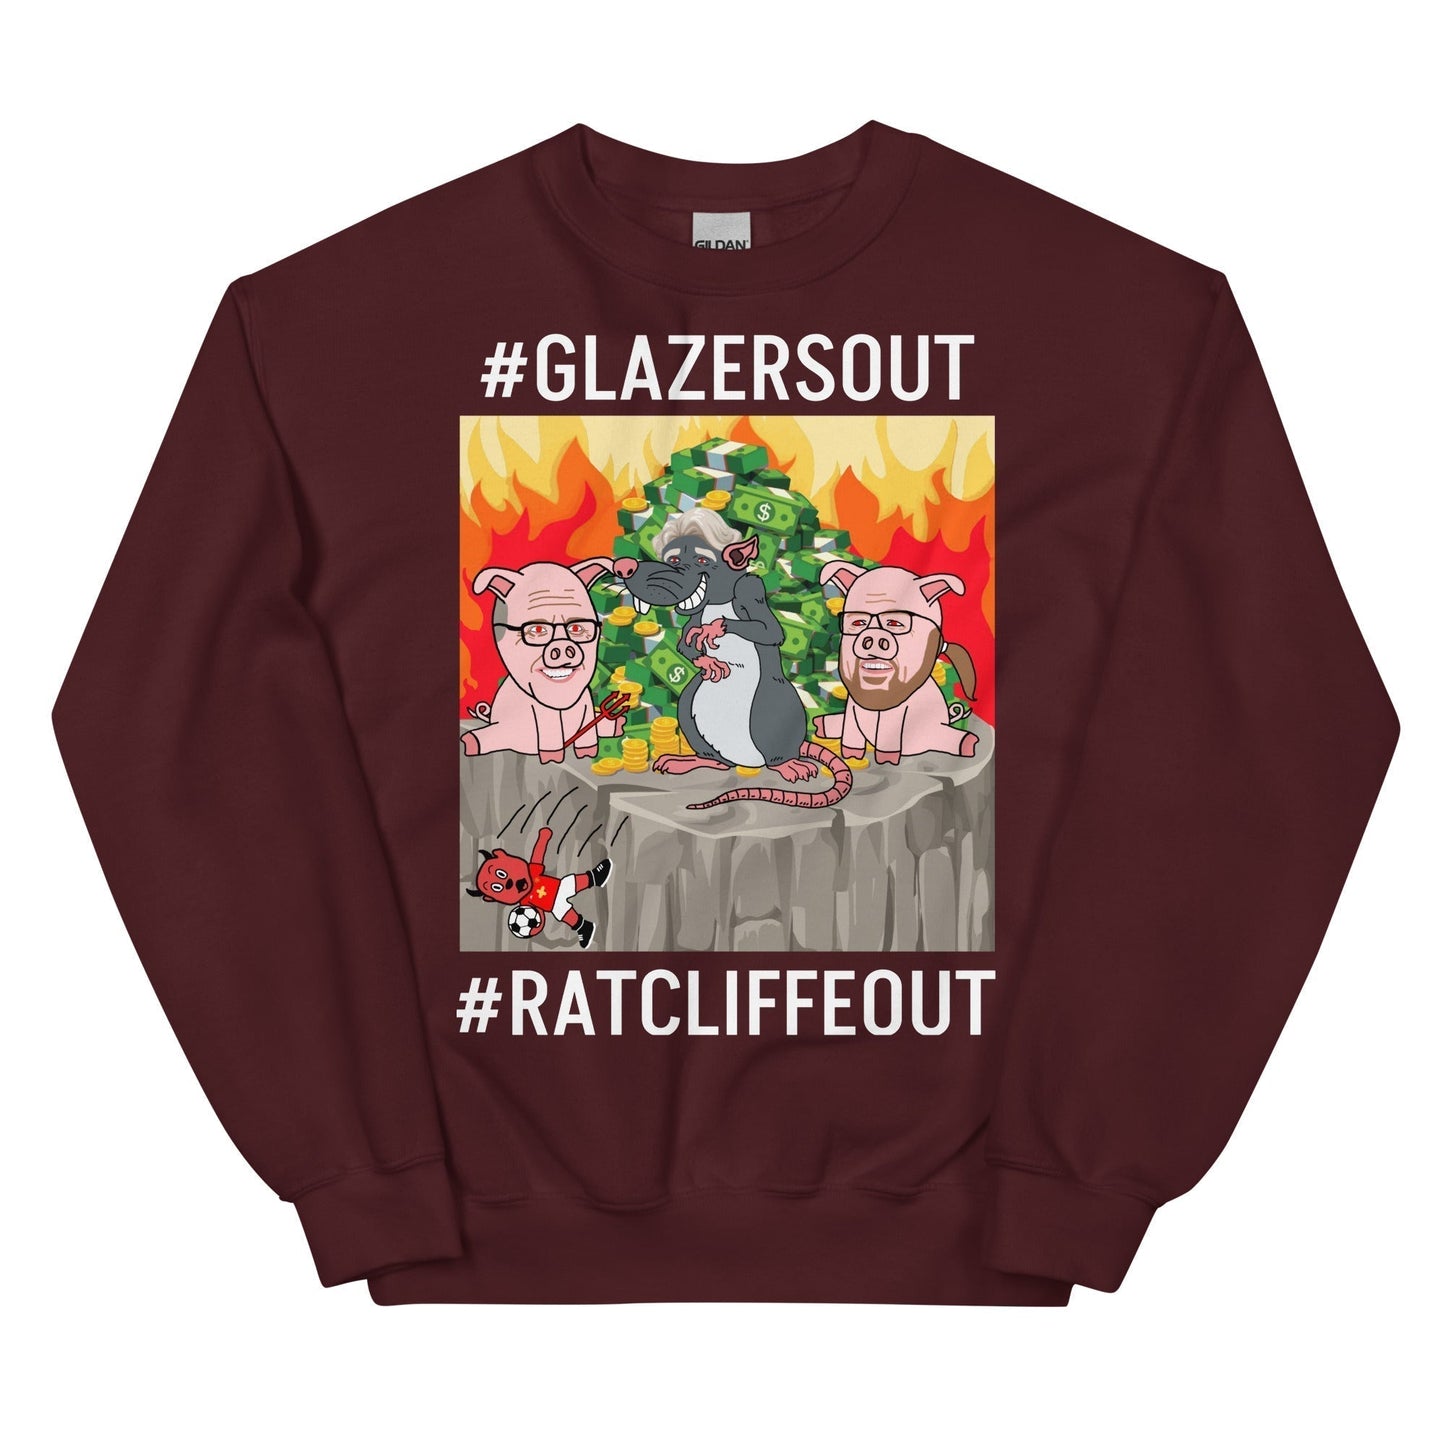 Manchester United Ratcliffe Out, Glazers Out Unisex Sweatshirt, White Letters, #GlazersOut #RatcliffeOut Next Cult Brand Football, GlazersOut, Manchester United, RatcliffeOut